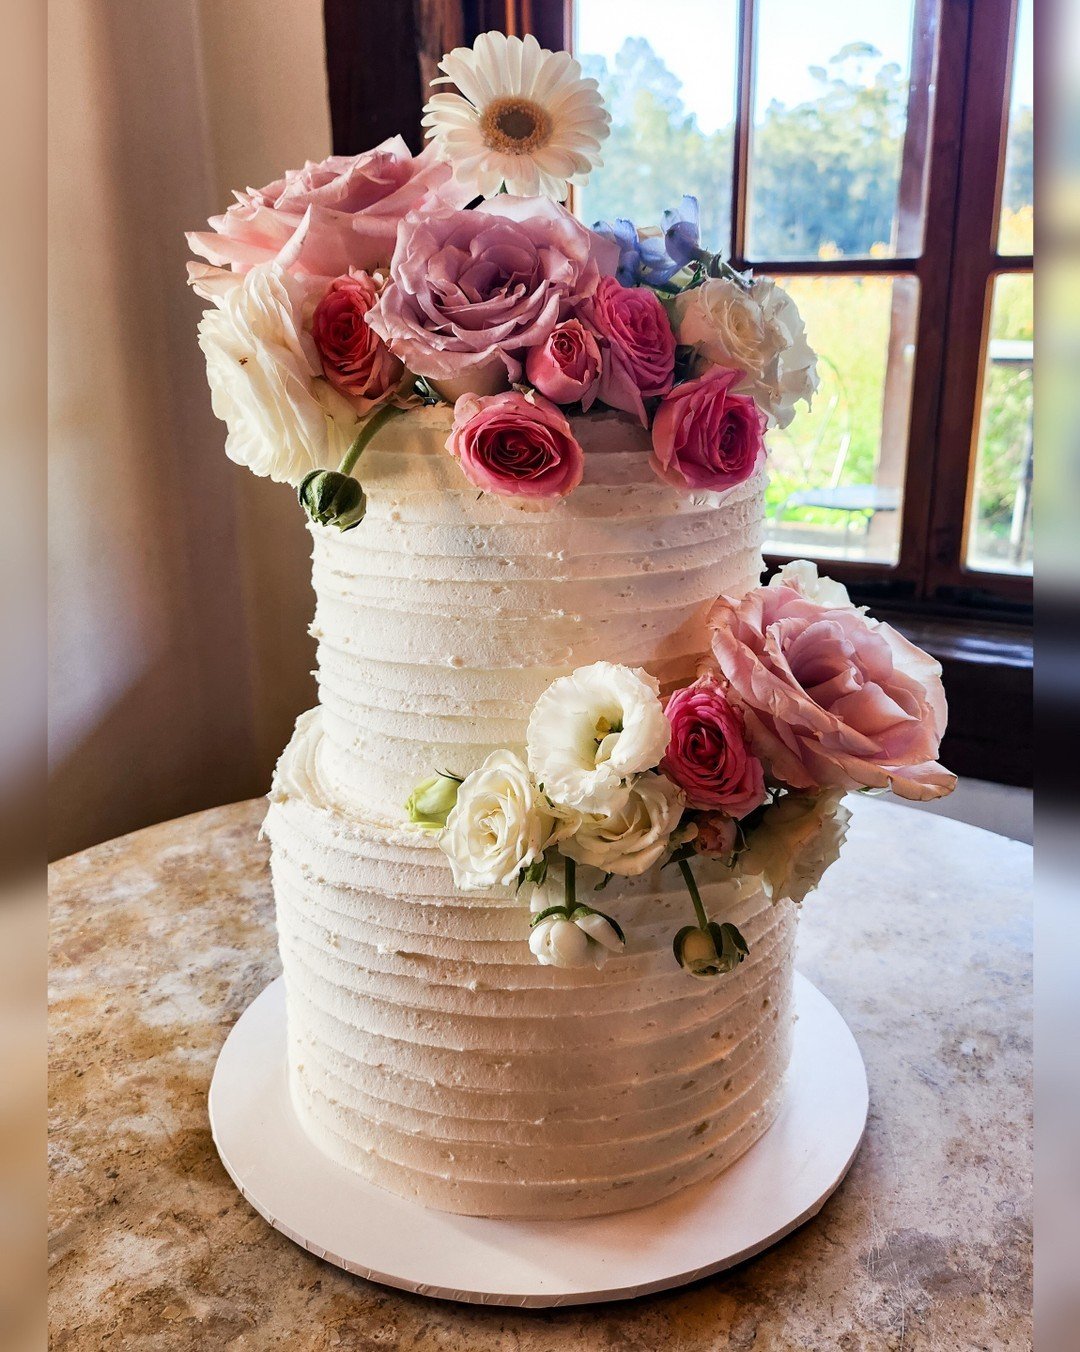 Harley &amp; Ashleigh - 09/09/2023

2 tier vintage iced in gluten free white choc strawberry with circle finish. STUNNING!💐 

📍 @circa1876
💐 @couture_botanical

#dragonflycakes #huntervalleywedding #huntervalleyweddingcake #weddingcake #newcastlen